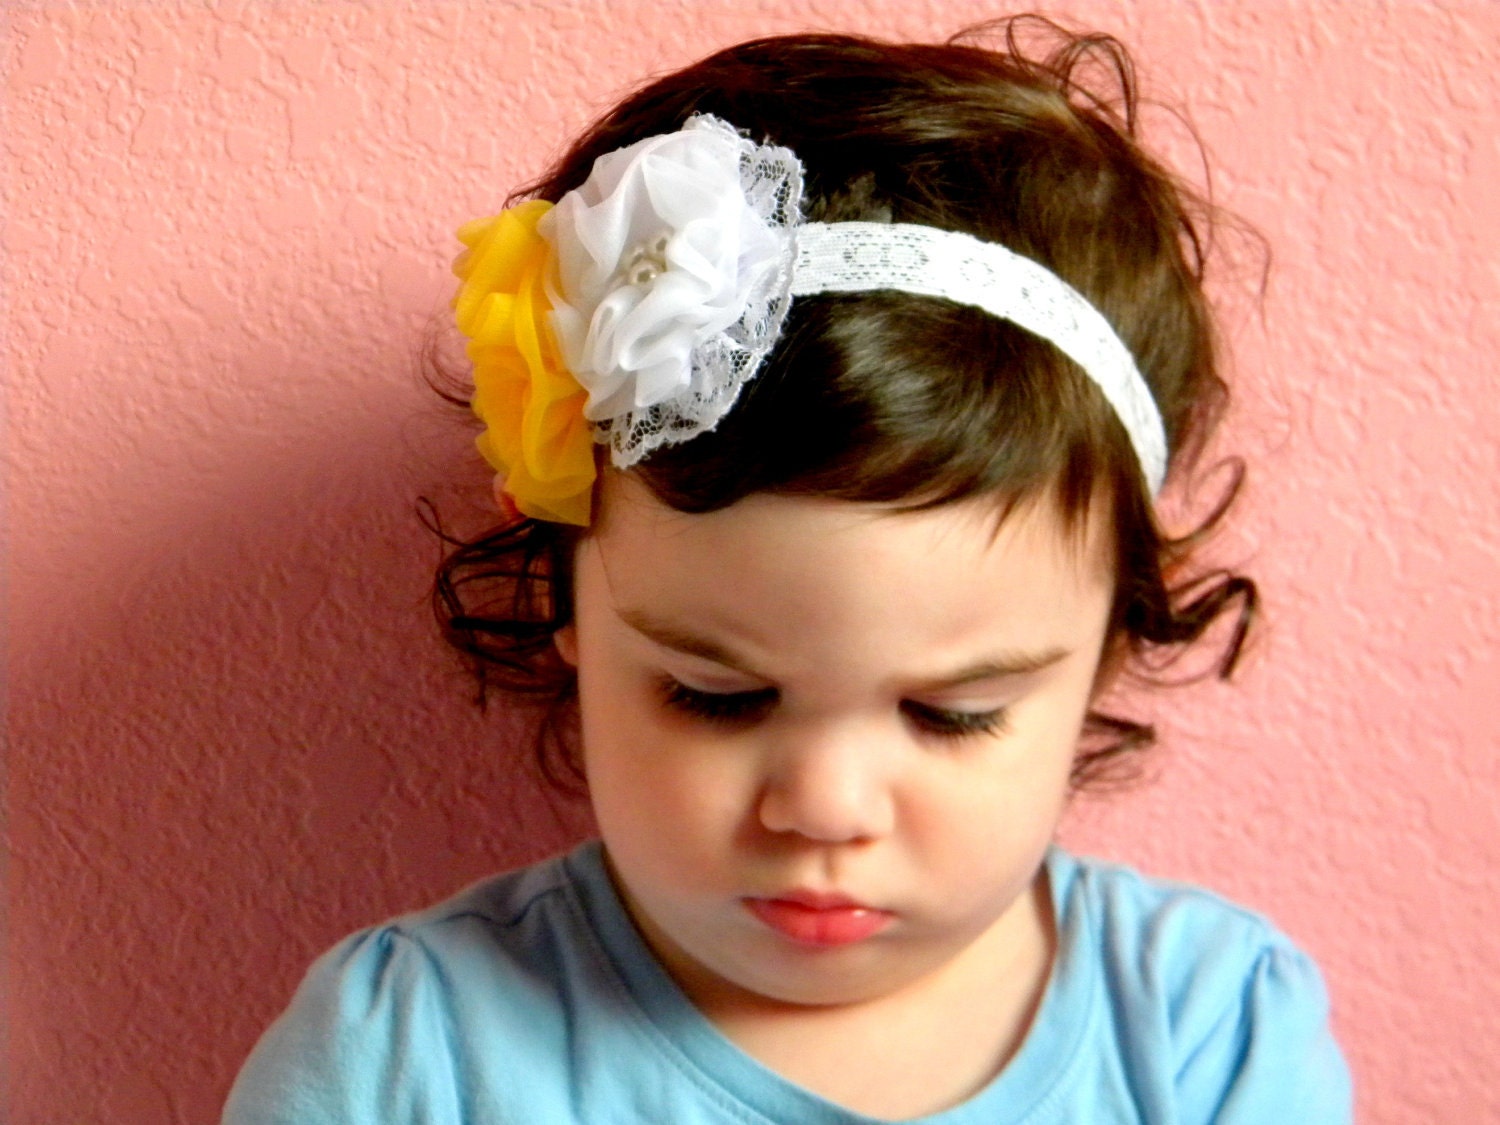 Yellow and white baby girls chiffon flower headband with pearls and lace on lace elastic READY TO SHIP